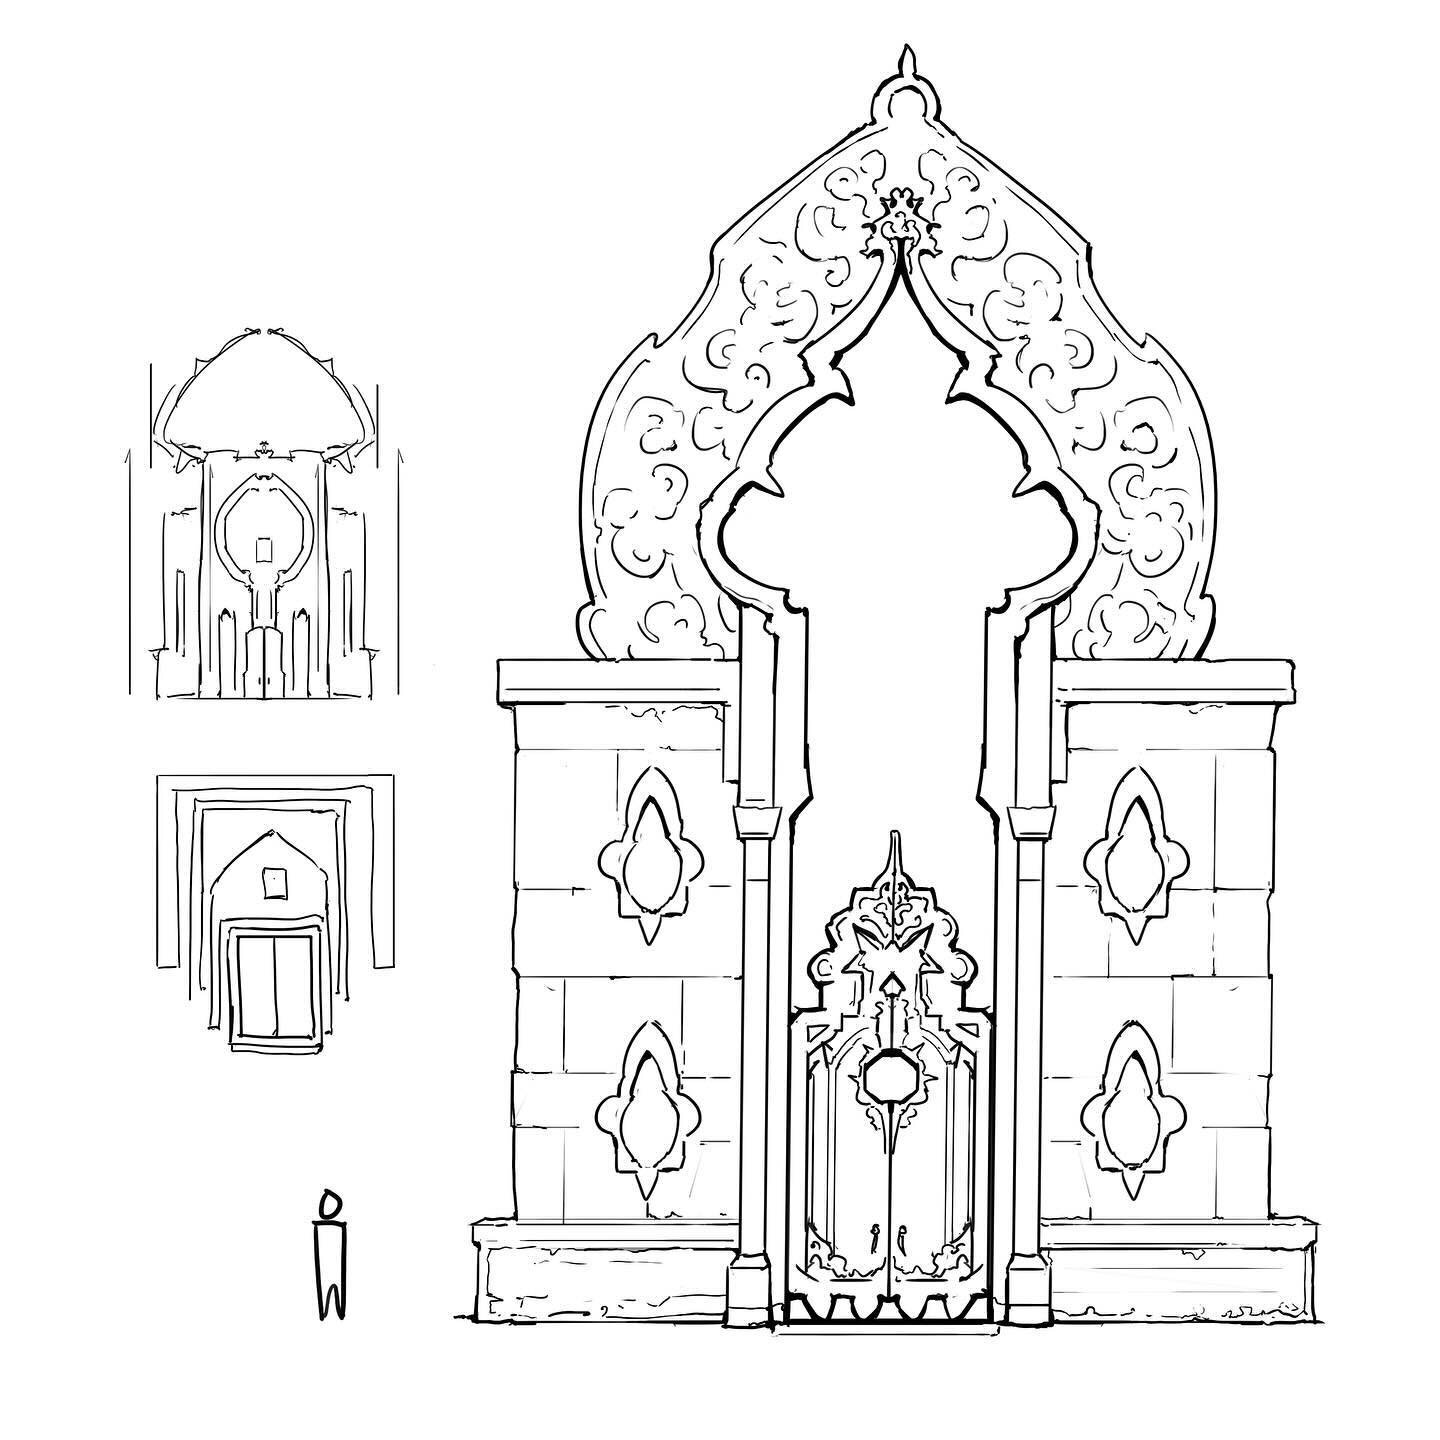 Class demo on designing a door inspired by Islamic architecture

#art #creative #design #conceptart #door #drawing #architecture #environment